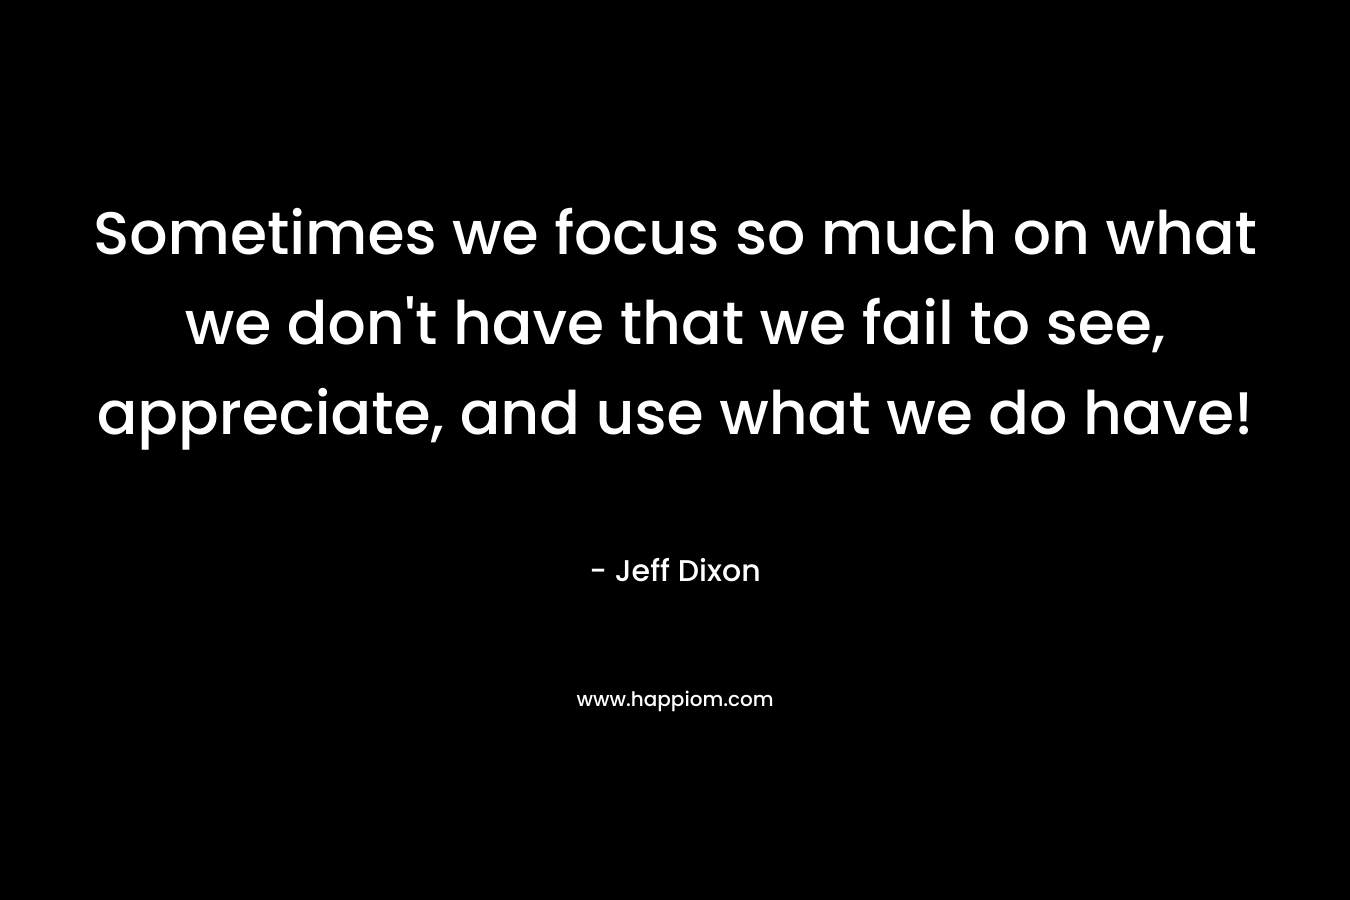 Sometimes we focus so much on what we don’t have that we fail to see, appreciate, and use what we do have! – Jeff Dixon